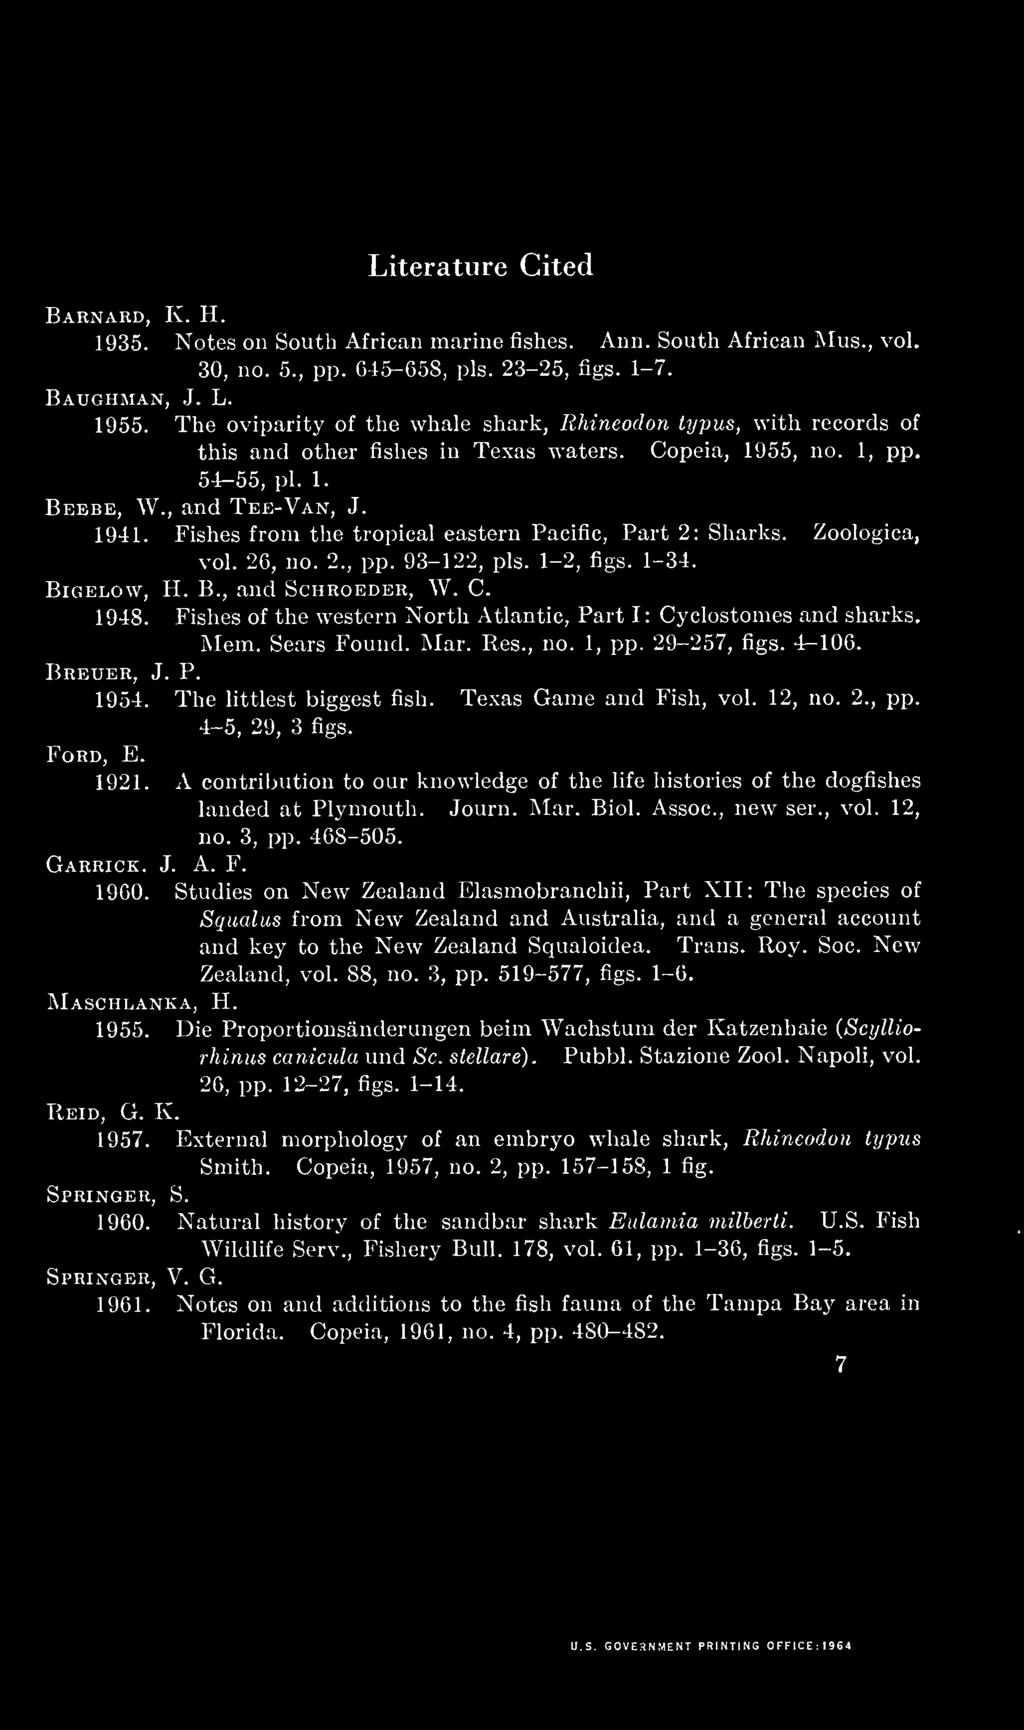 xas Game and Fish, vol. 12, no. 2., pp. 4-5, 29, 3 figs. 1921. A contribution to our knowledge of the life histories of the dogfishes landed at Plymouth. Journ. Mar. Biol. Assoc, new ser., vol. 12, no. 3, pp.